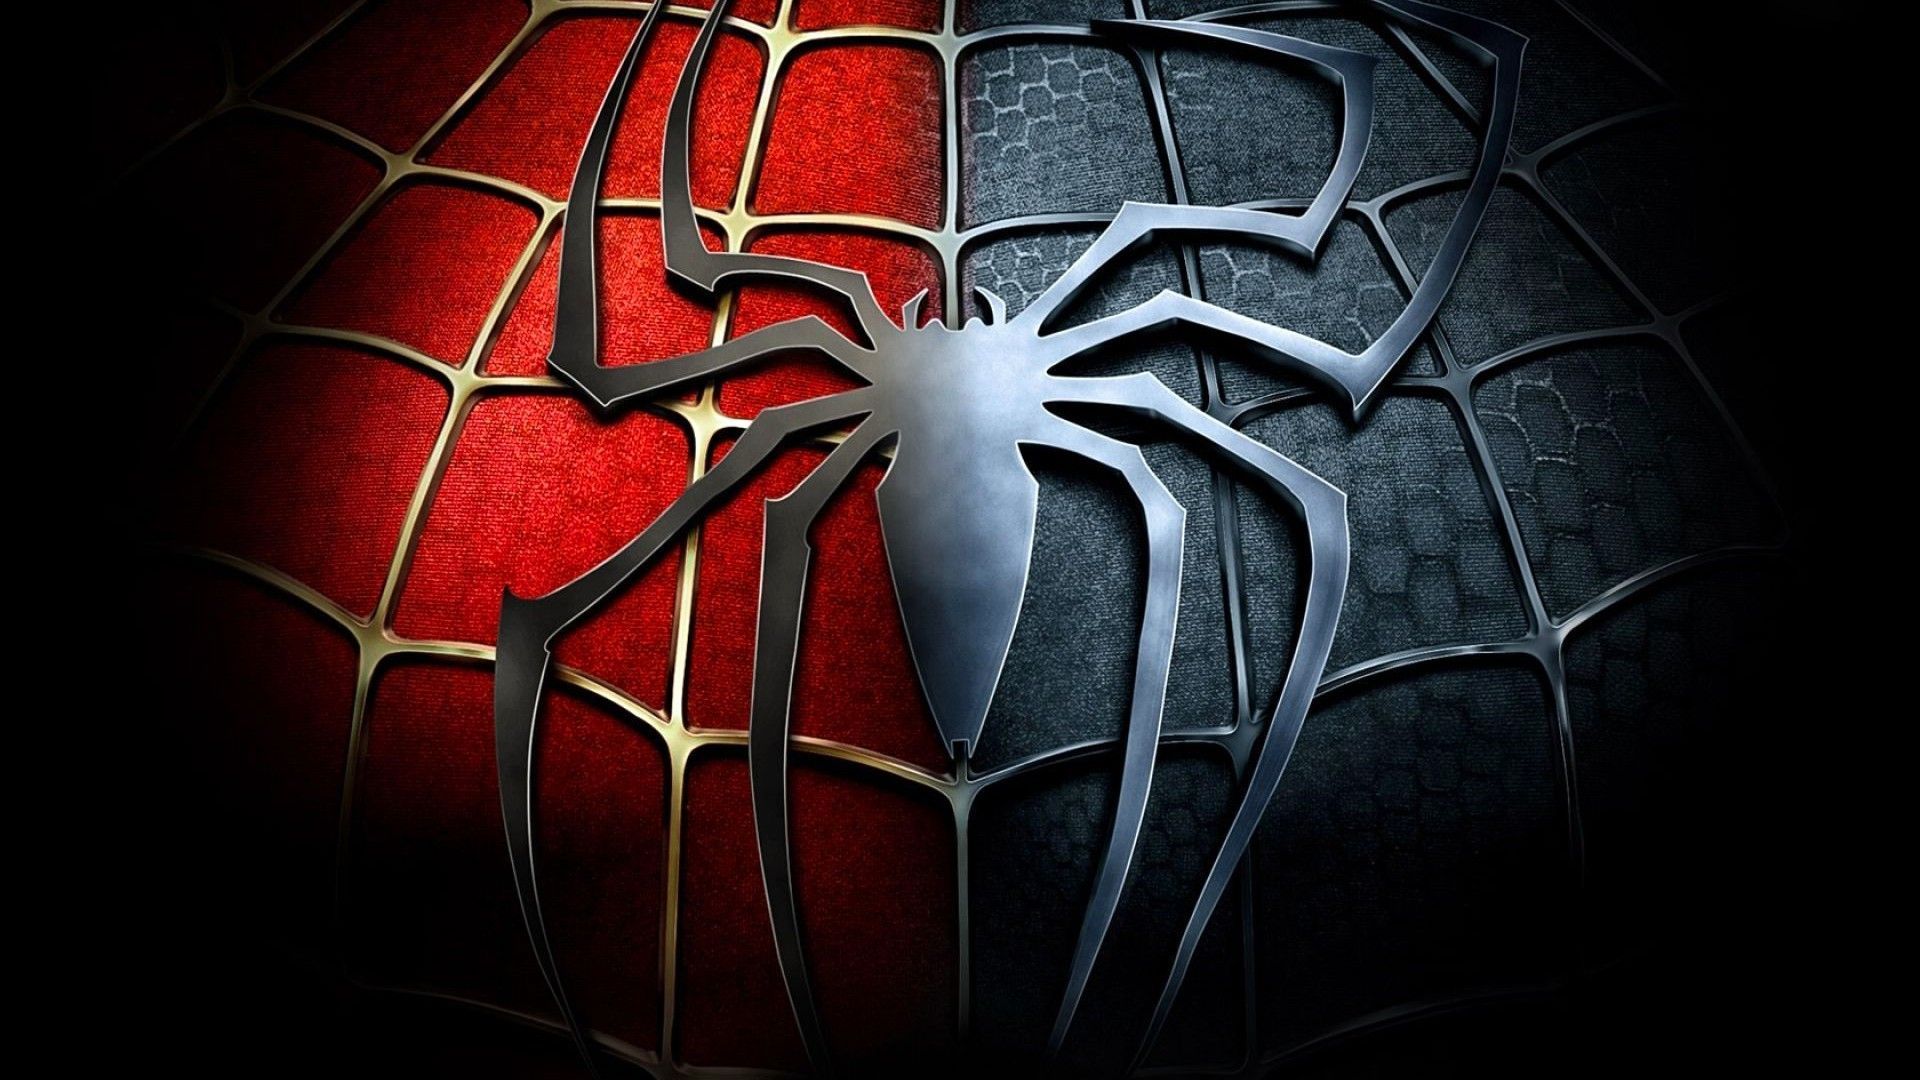 Free download Spiderman Logo Wallpaper Mobile RSL Awesomeness